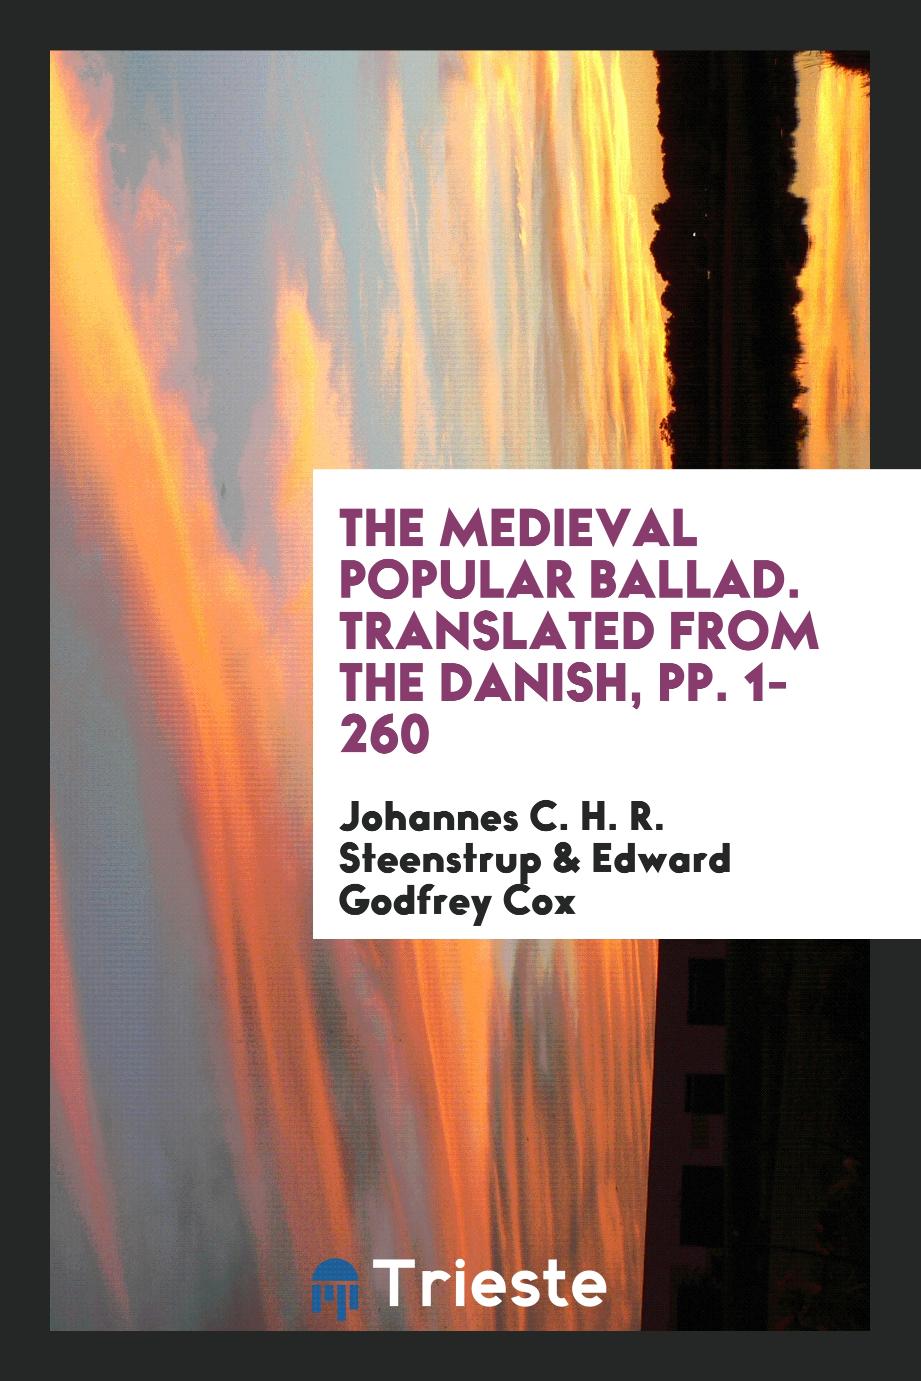 The Medieval Popular Ballad. Translated from the Danish, pp. 1-260